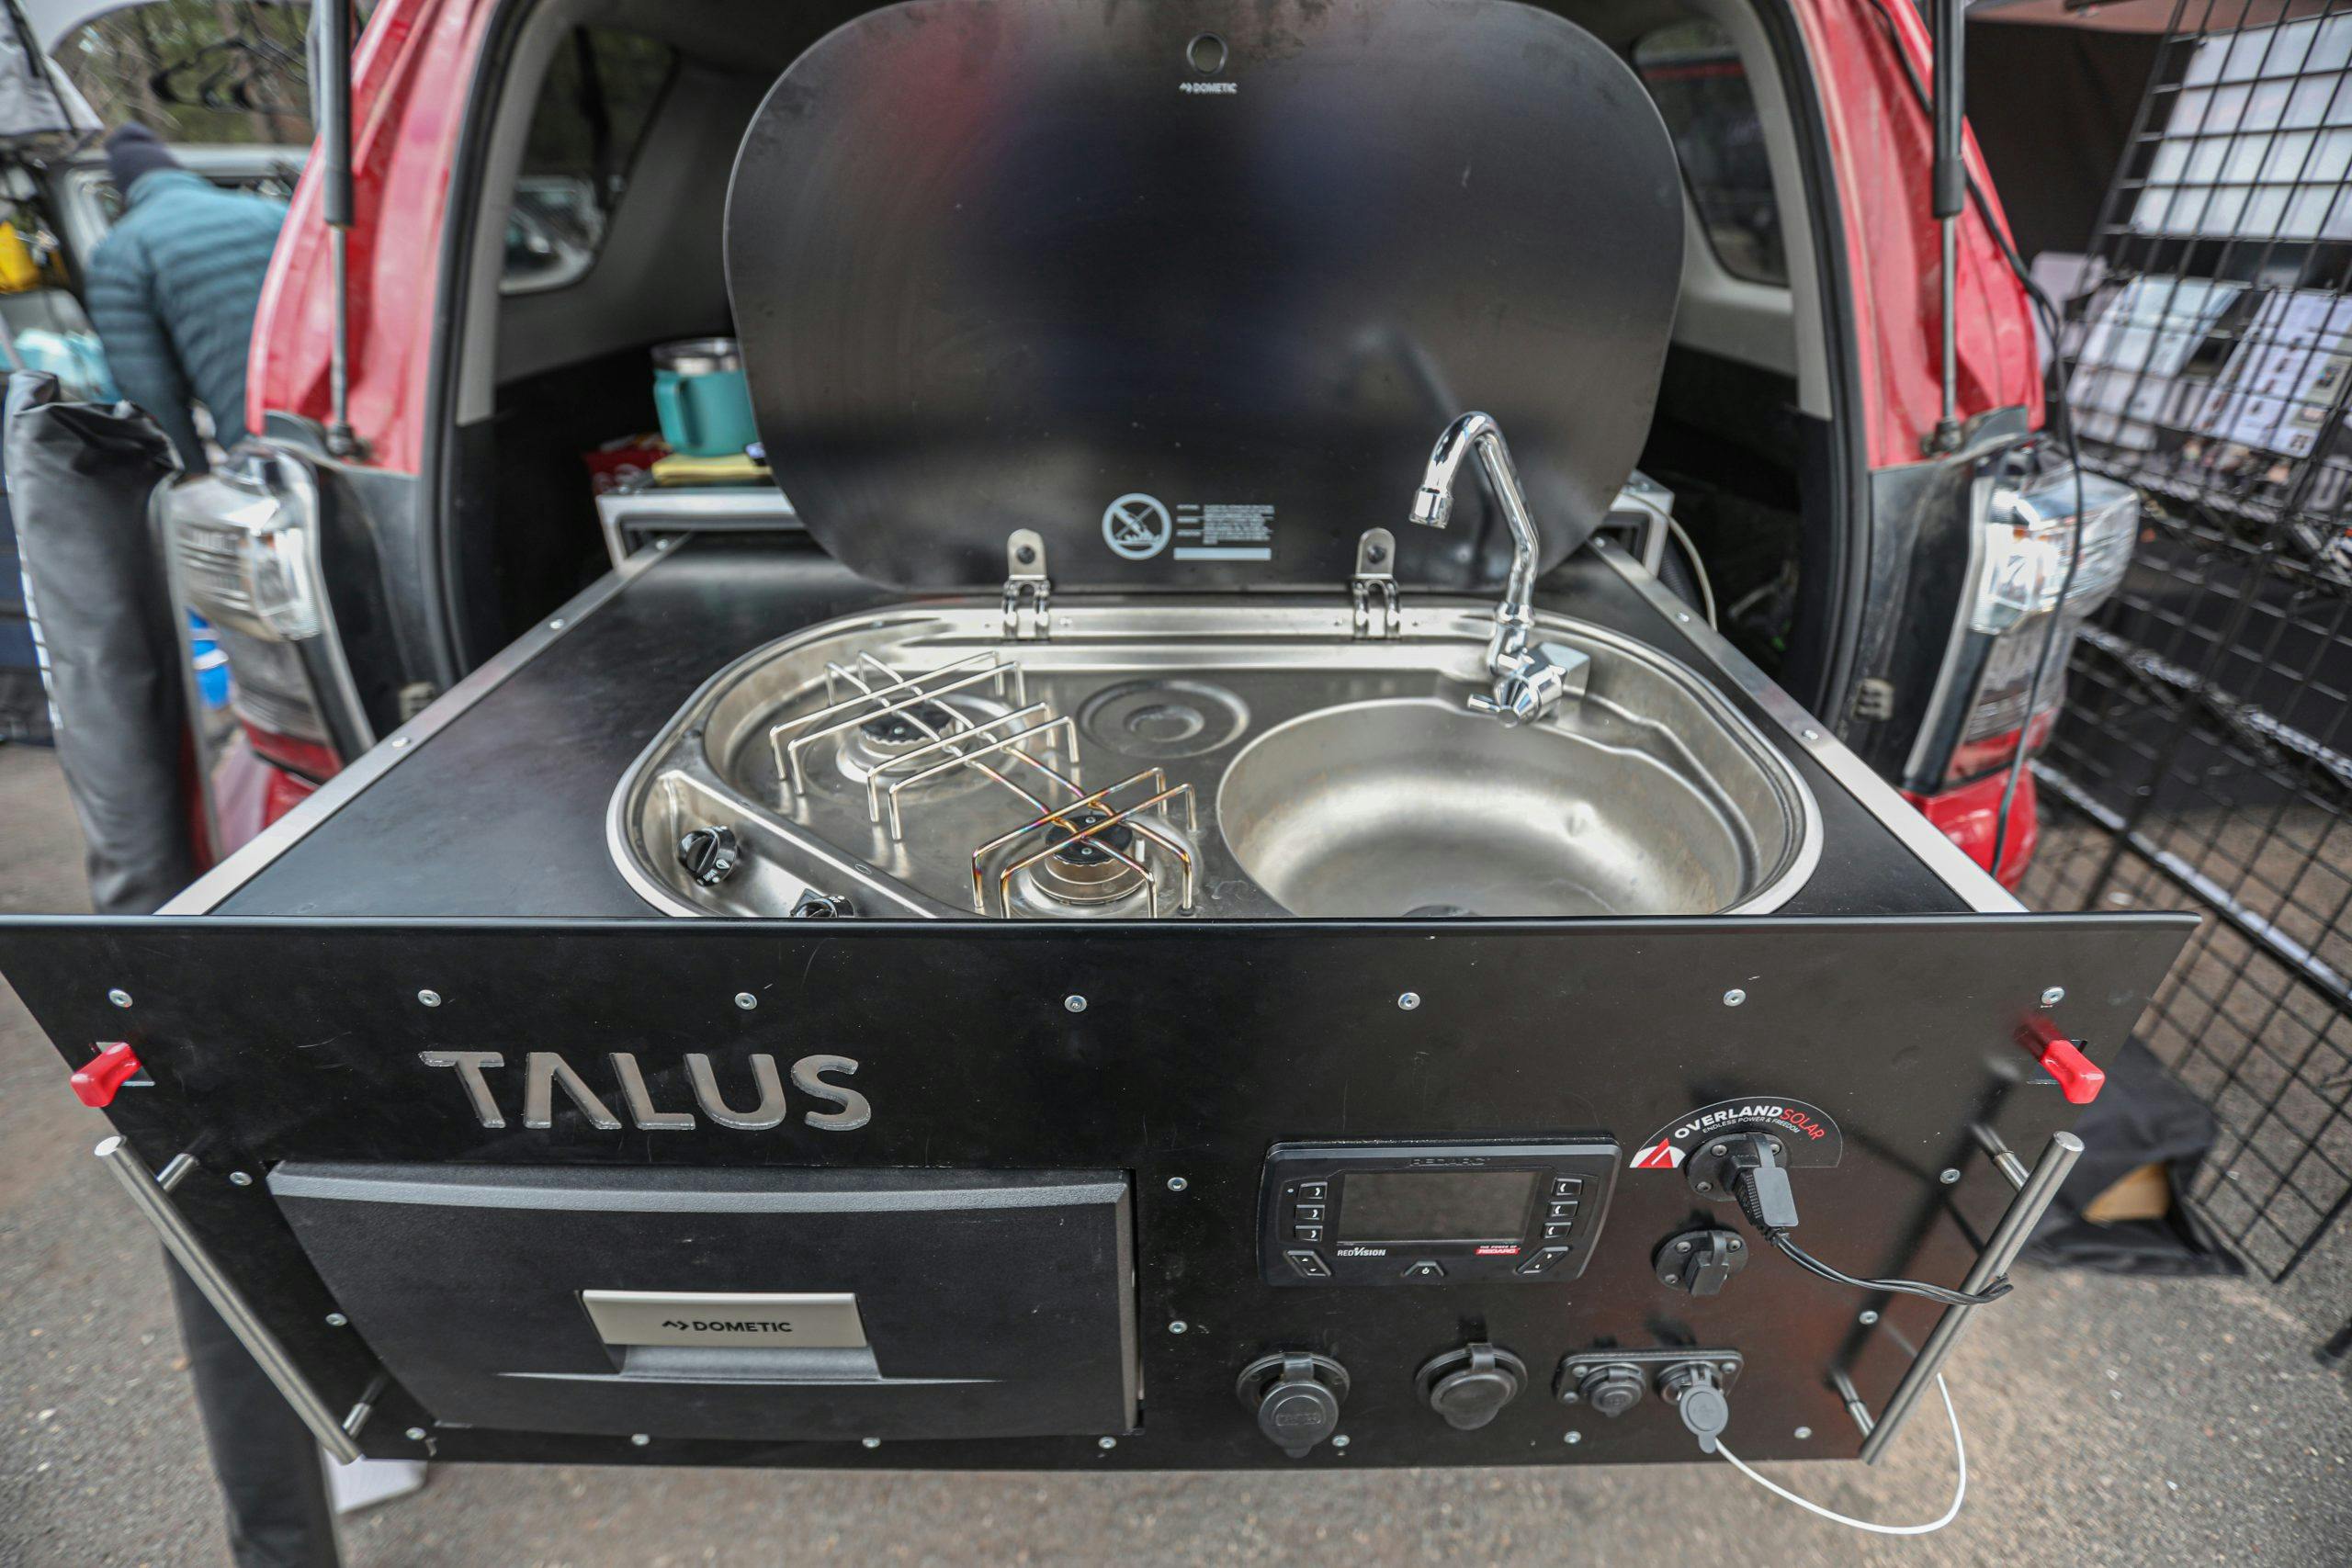 Talus camp kitchen Overland Expo 2021